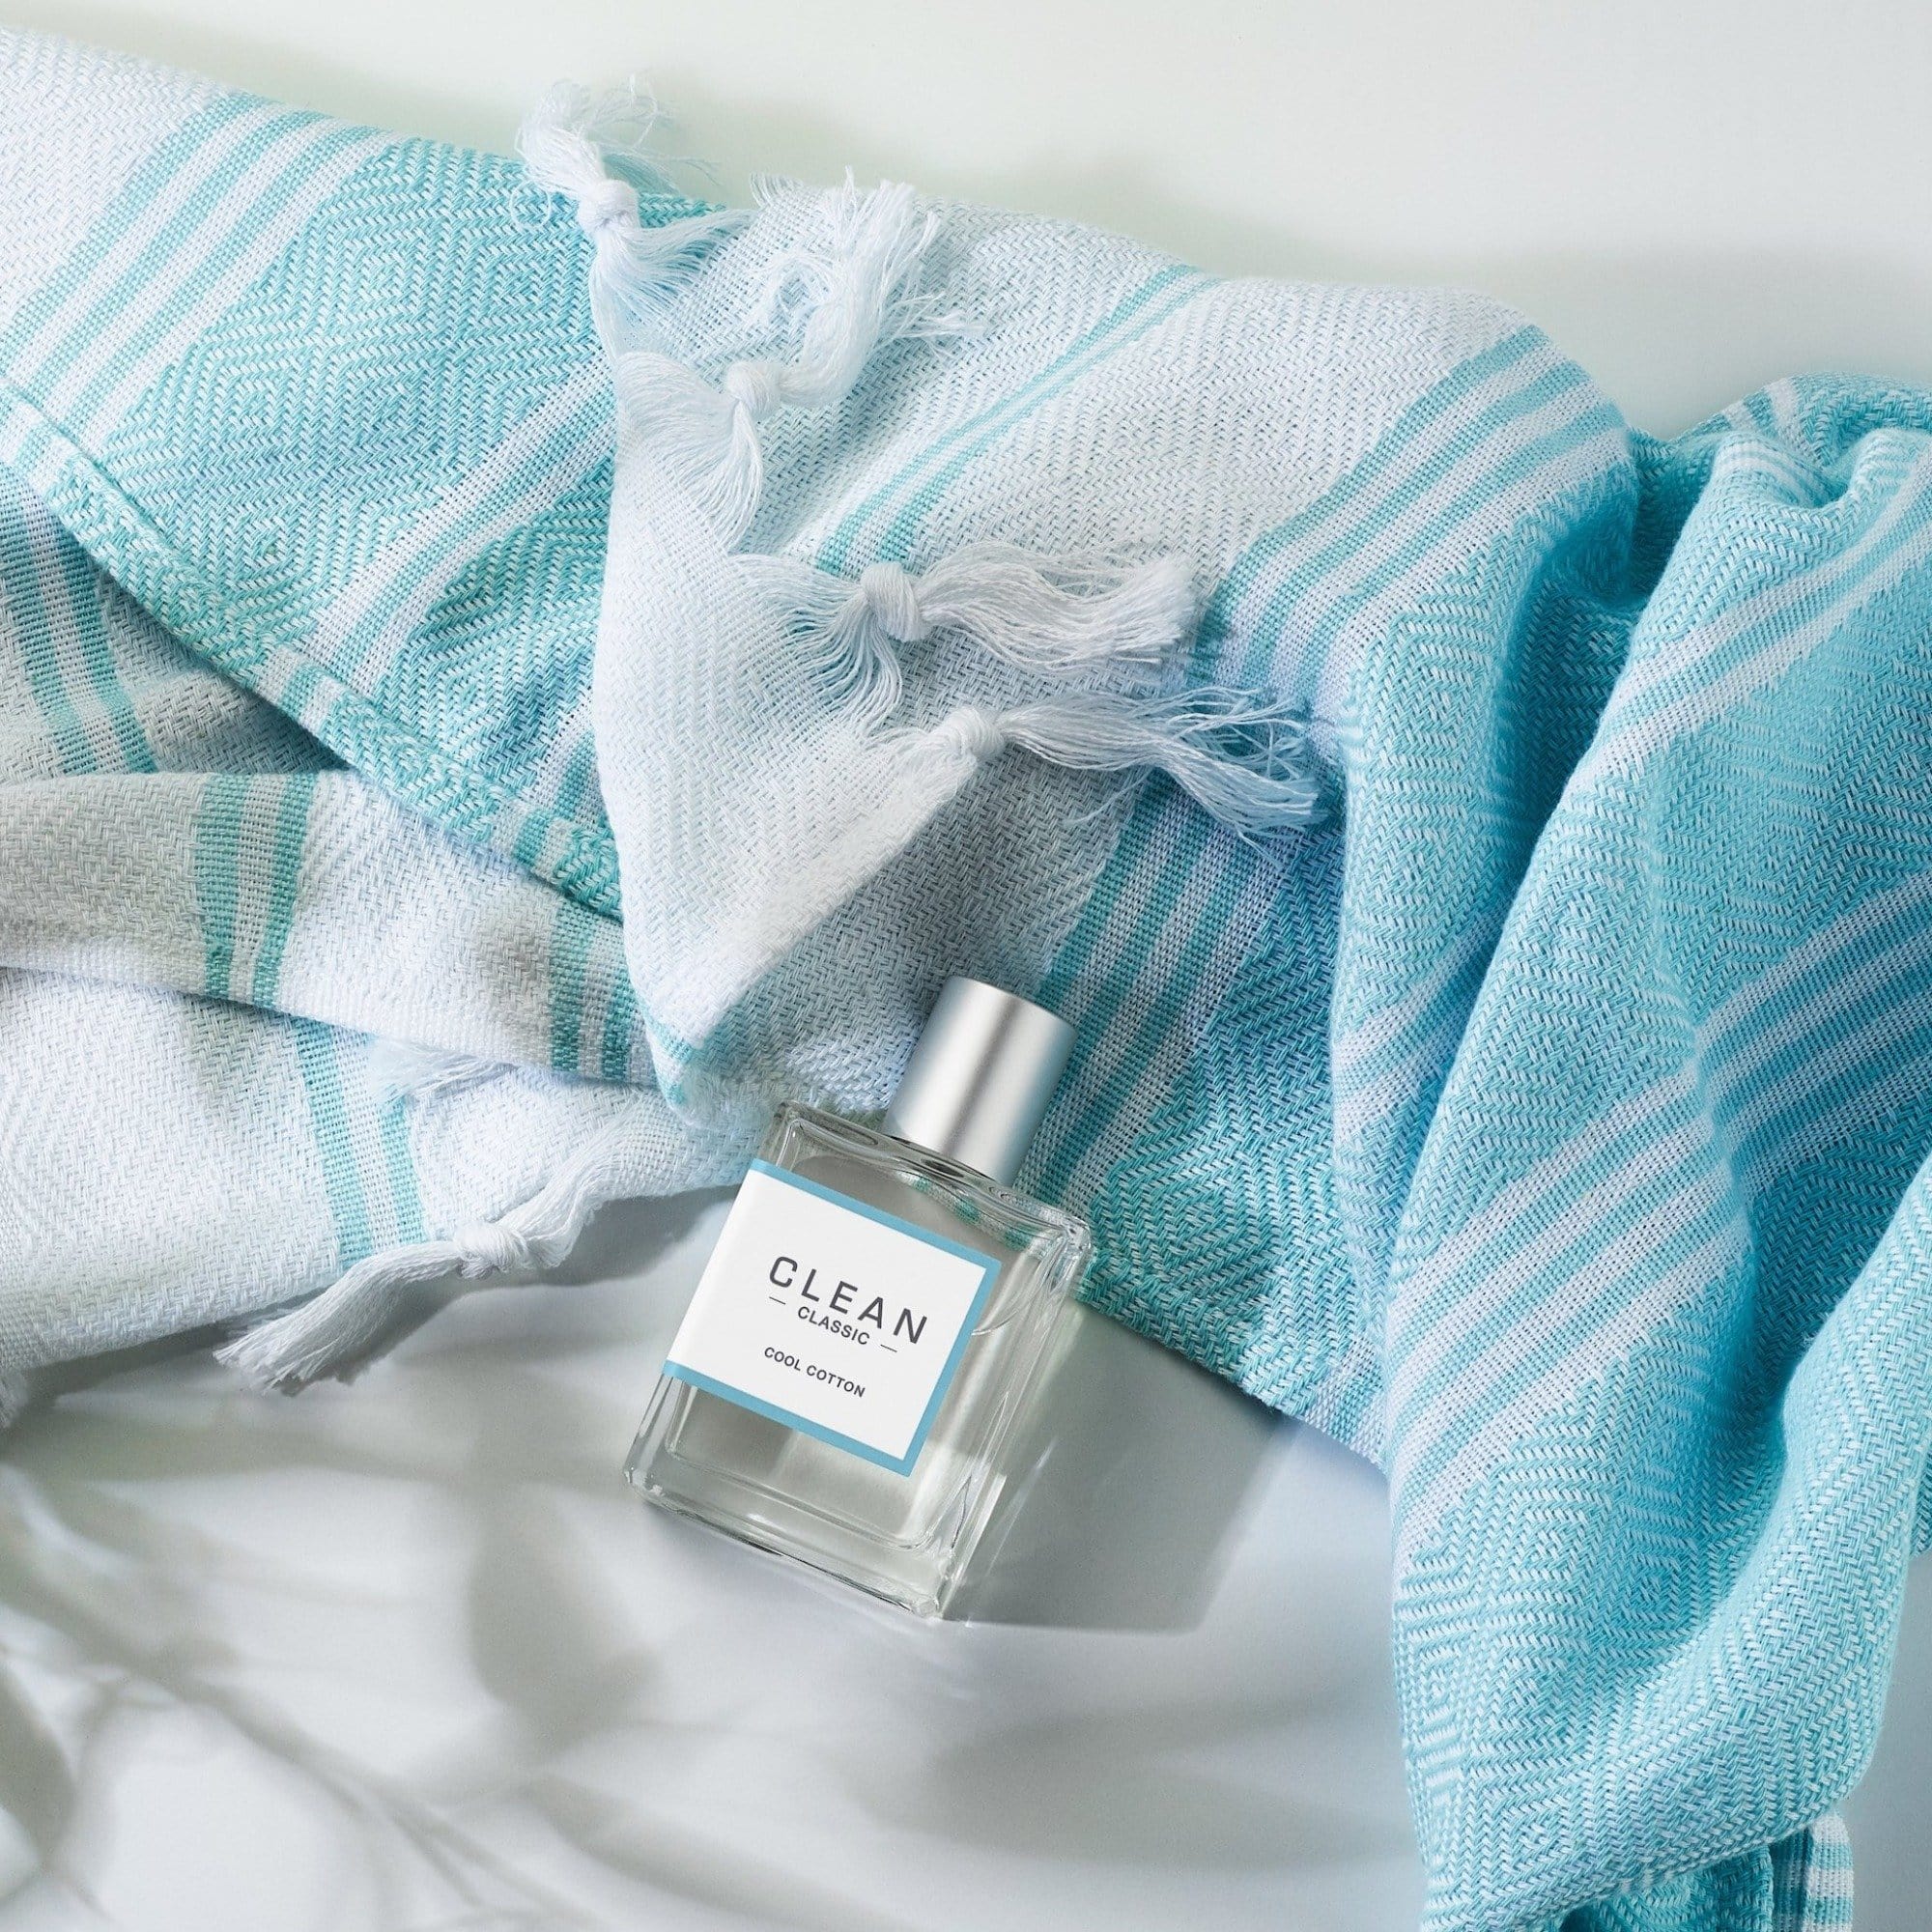 Clean Classic Cool Cotton  Clean Perfume by Clean Beauty